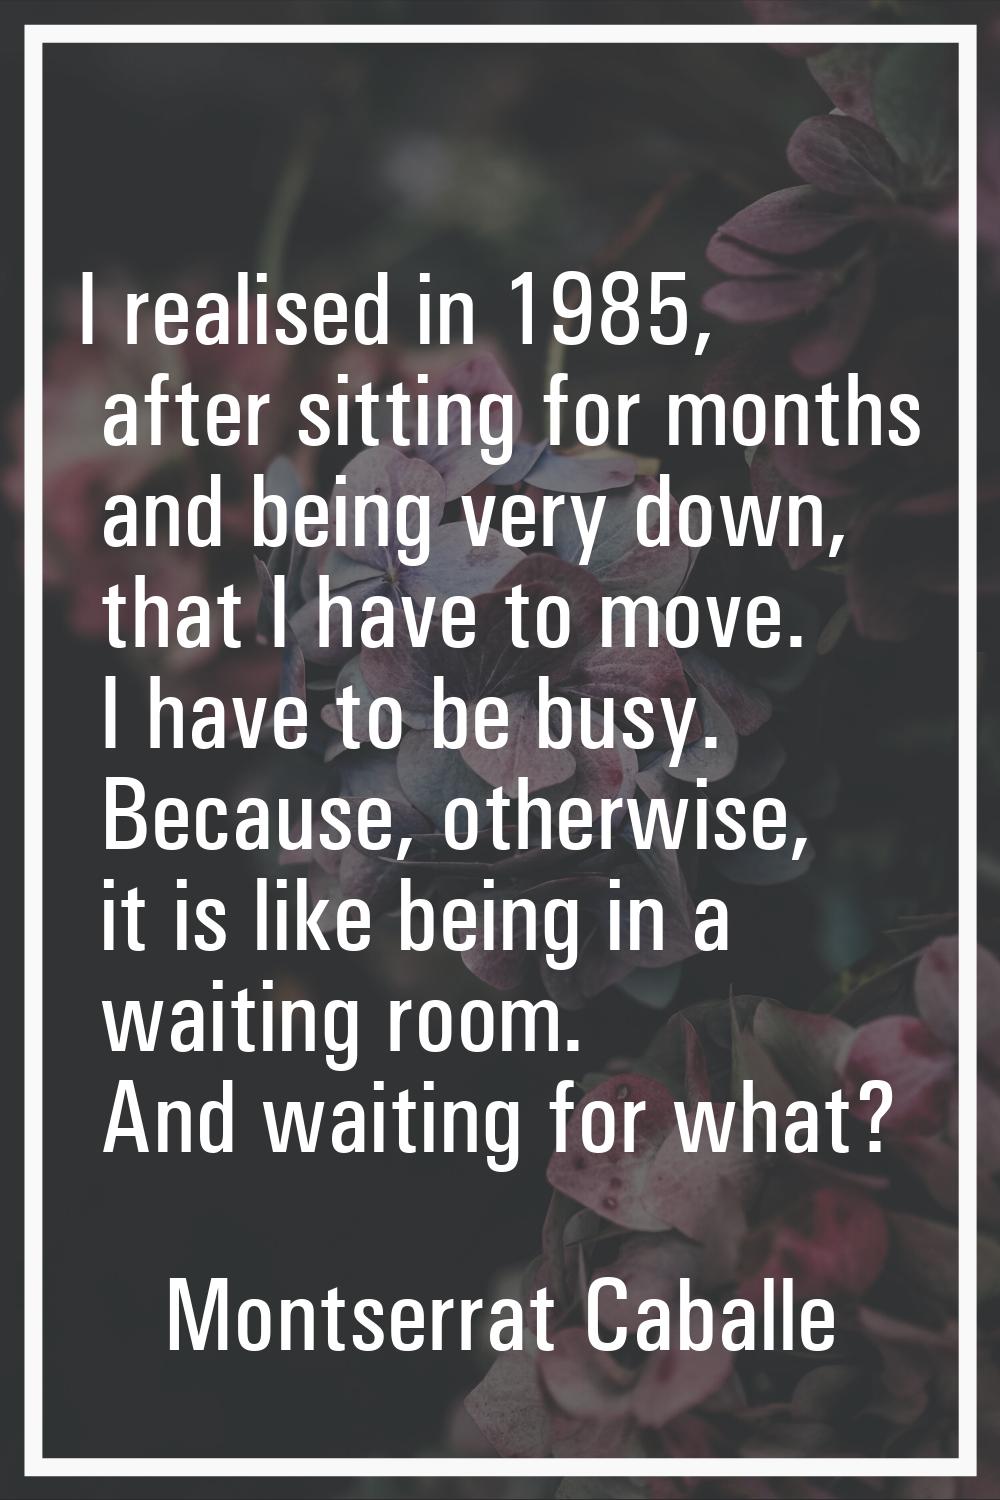 I realised in 1985, after sitting for months and being very down, that I have to move. I have to be